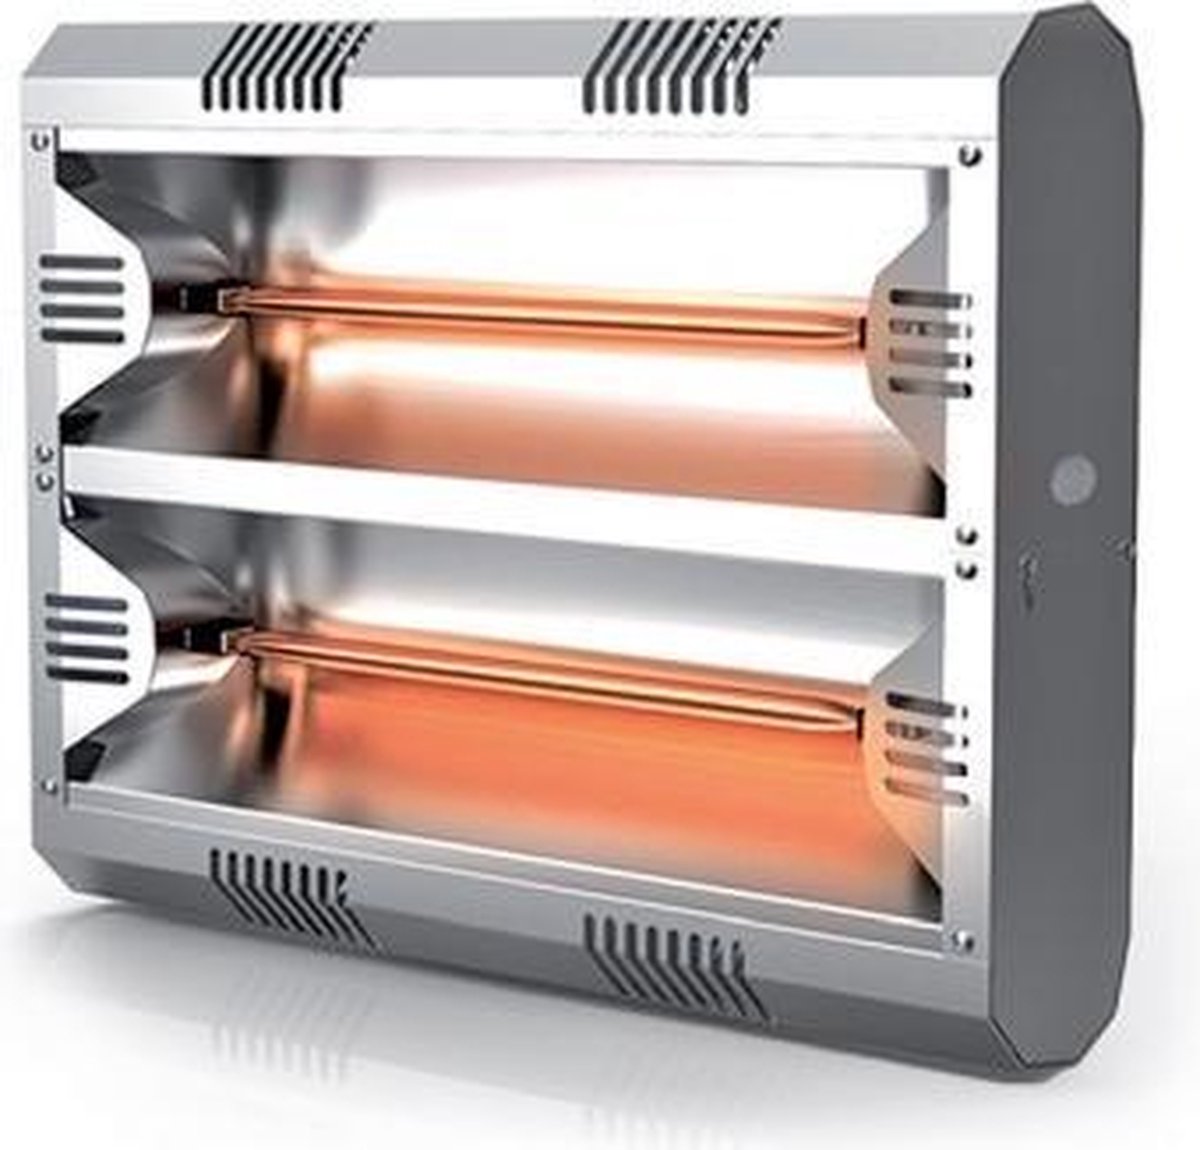 Hathor radiant heater 792 made of aluminium 4000W with infrared technology from Moel